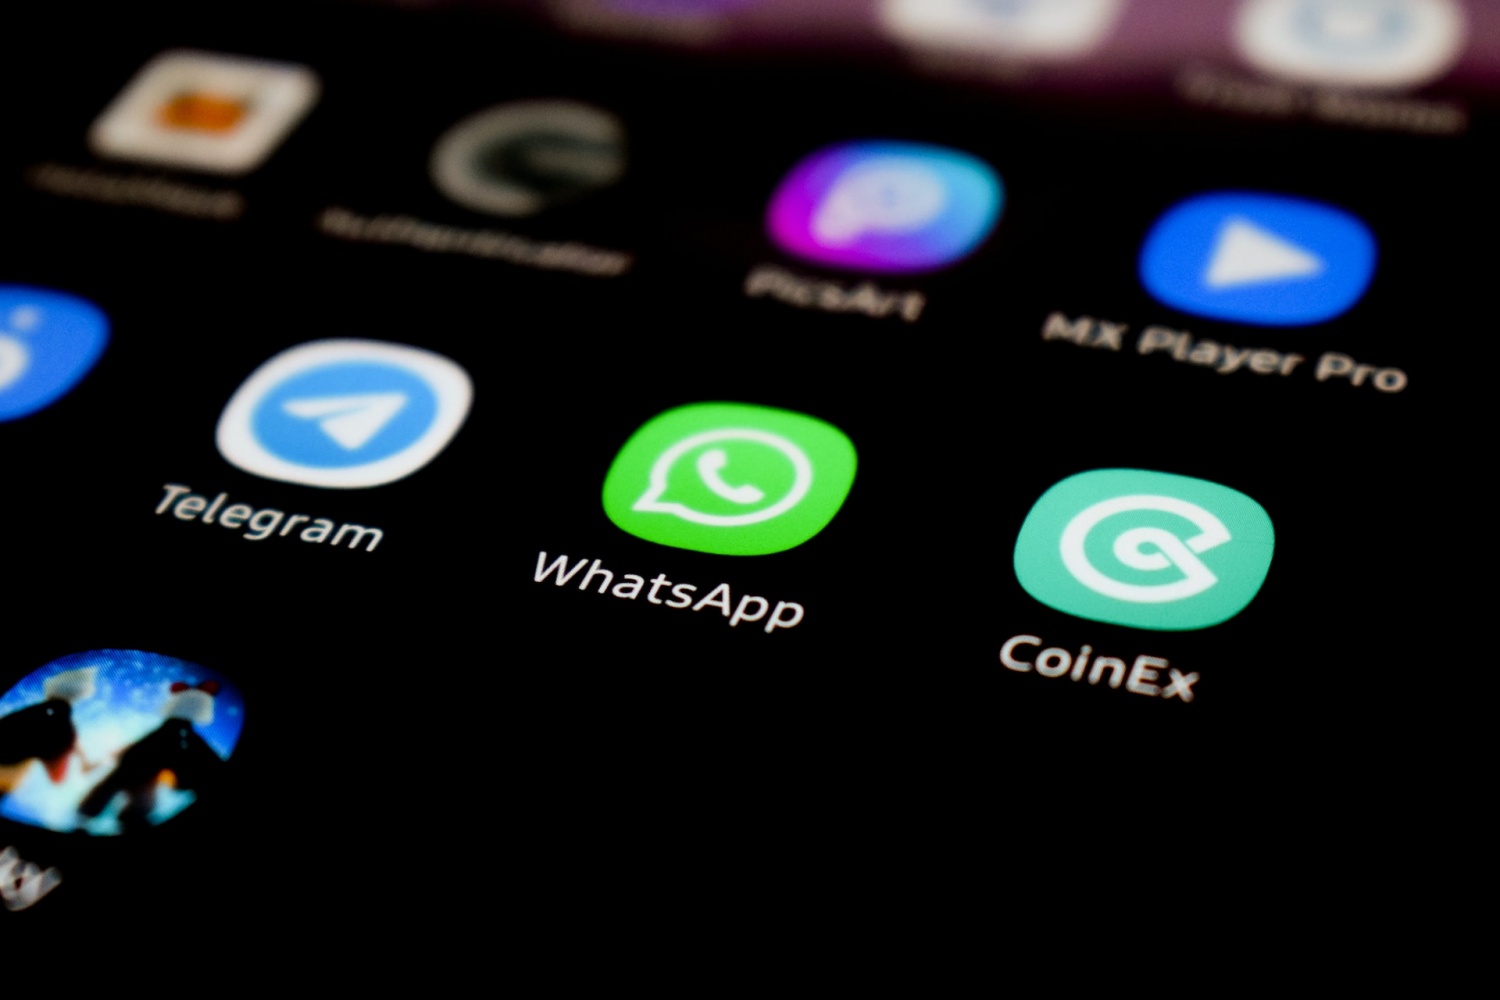 WhatsApp for iOS Now Allows Users to Add Descriptions to Forwarded Media